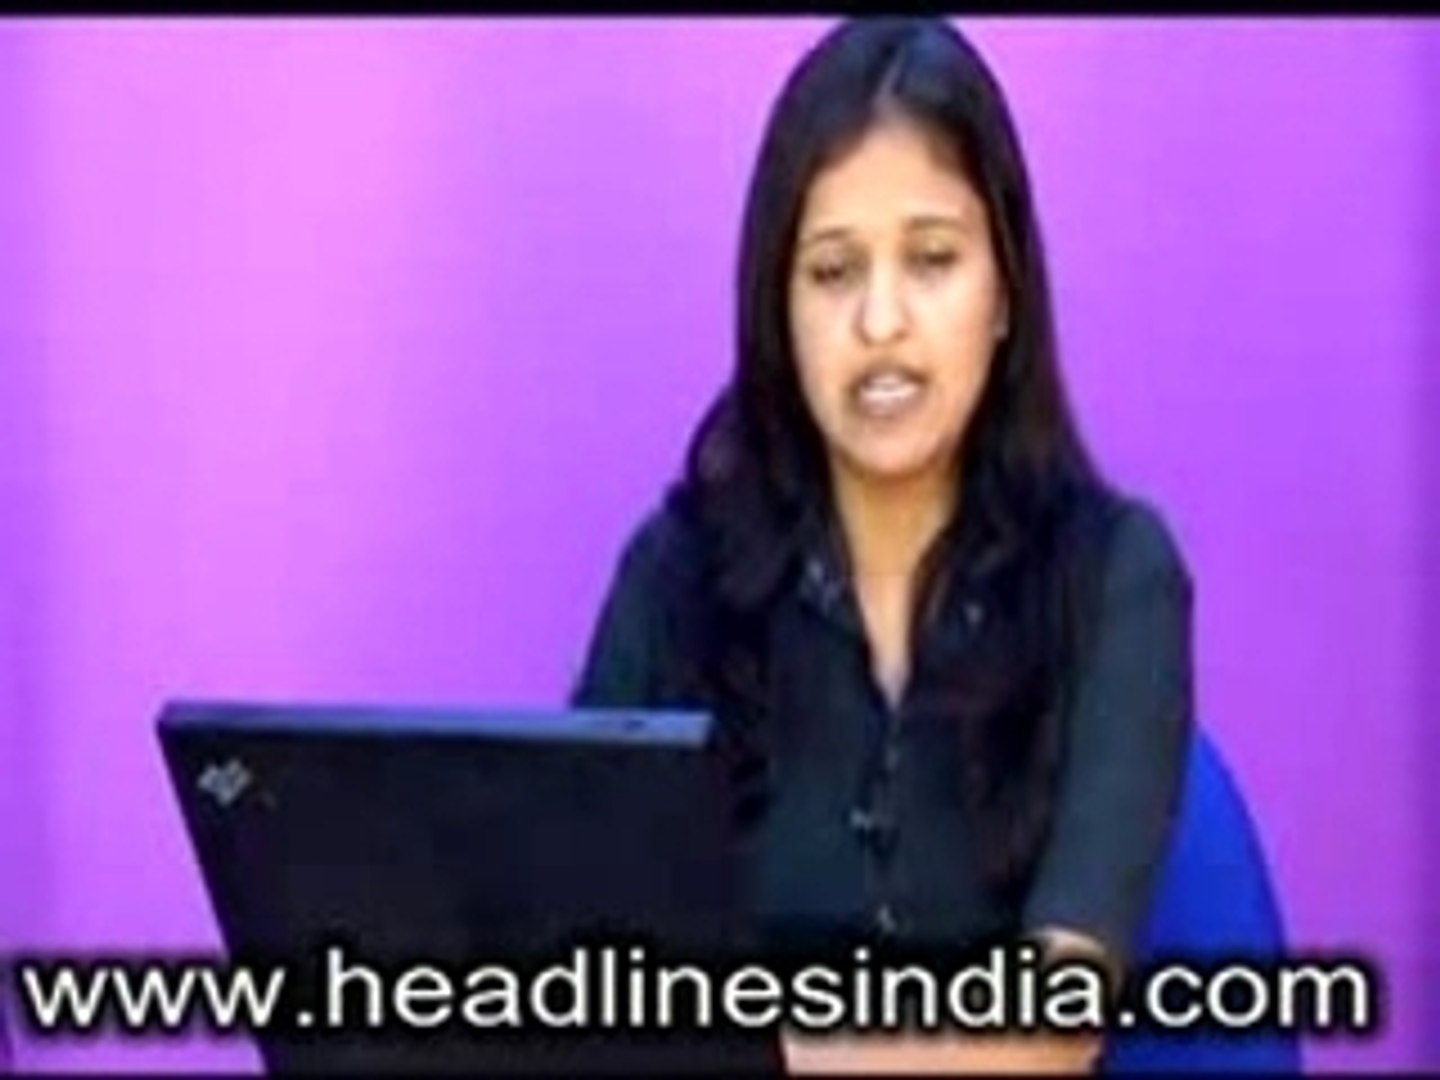 India Online News, Russian year in India